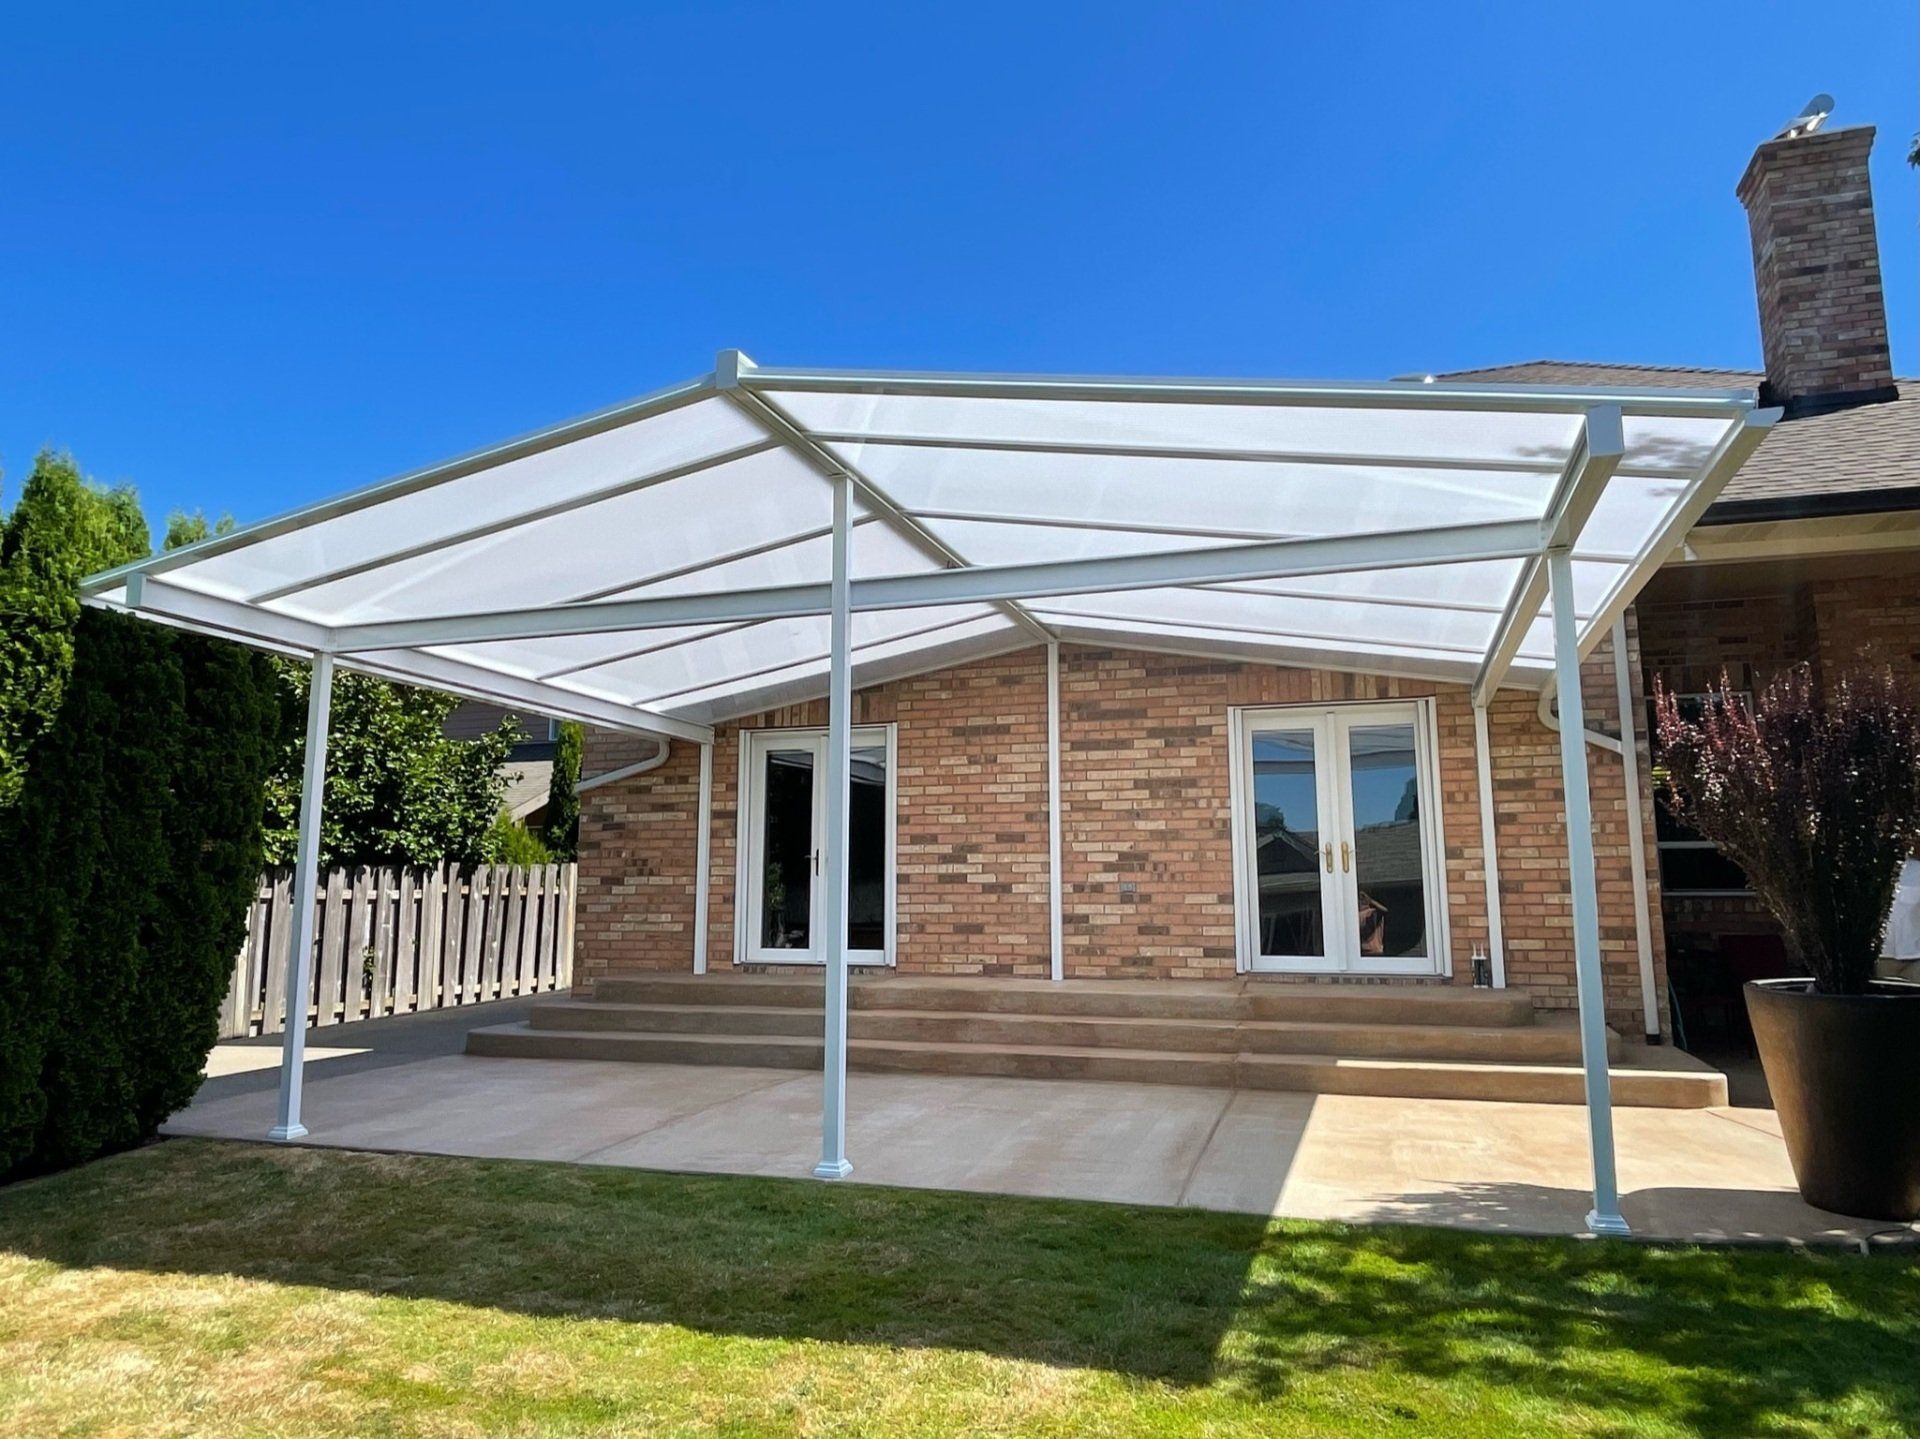 Portland Patio Covers - Gable Style Upper Deck in Black